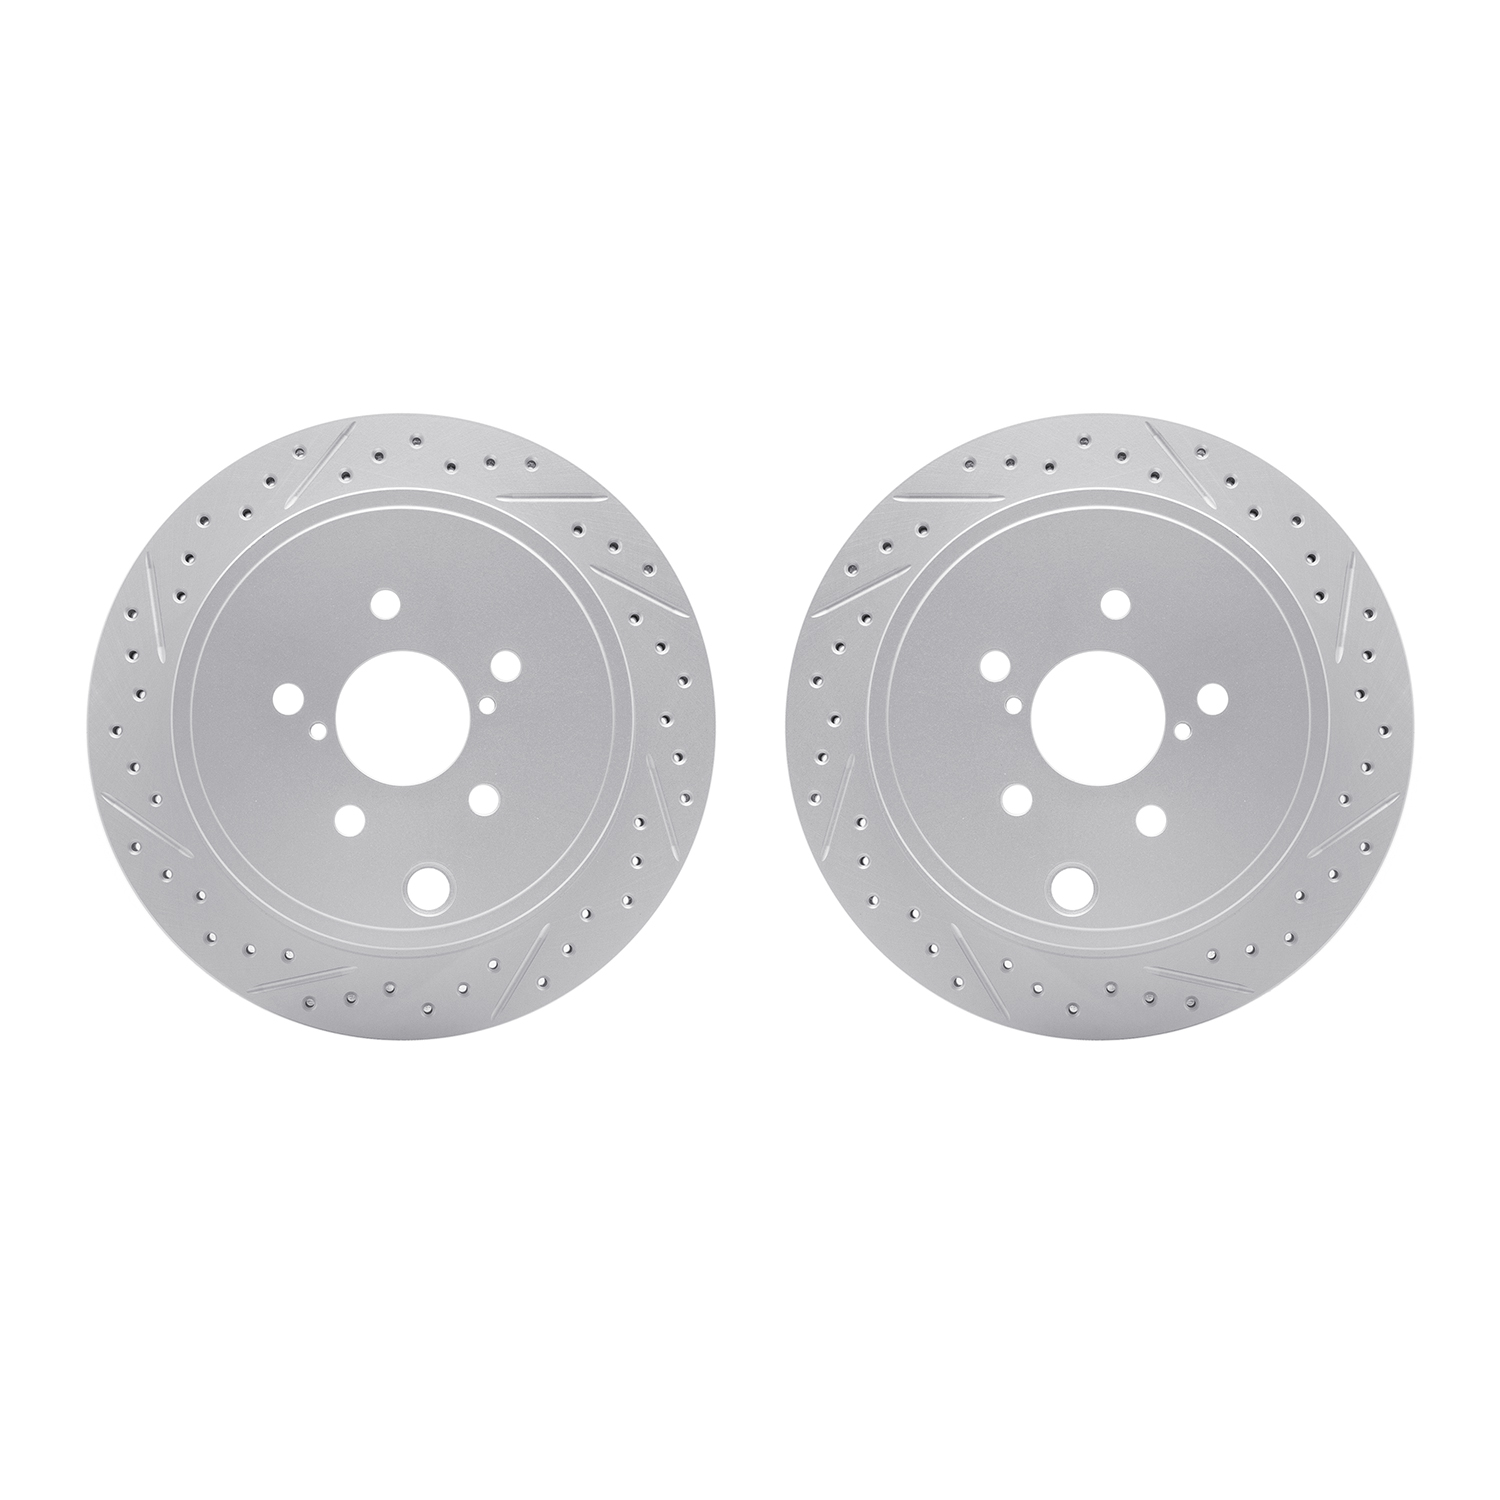 Geoperformance Drilled/Slotted Brake Rotors, Fits Select Multiple